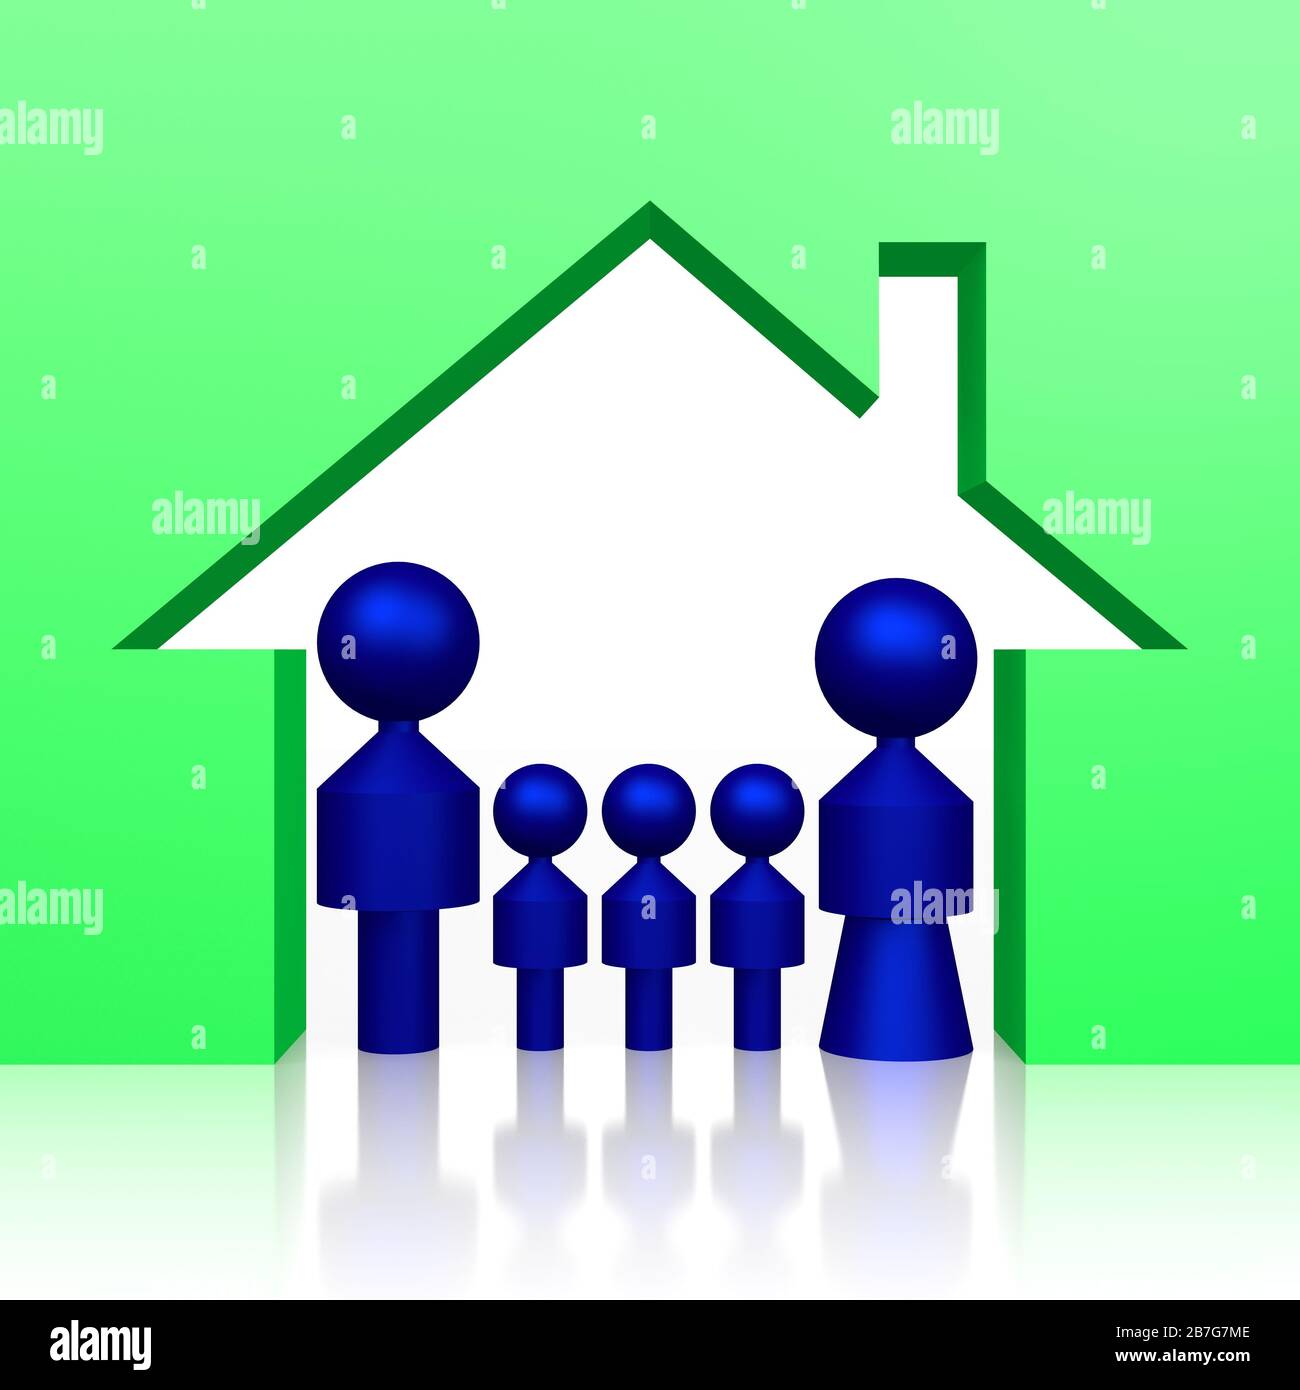 3D geometrical house and family shapes Stock Photo